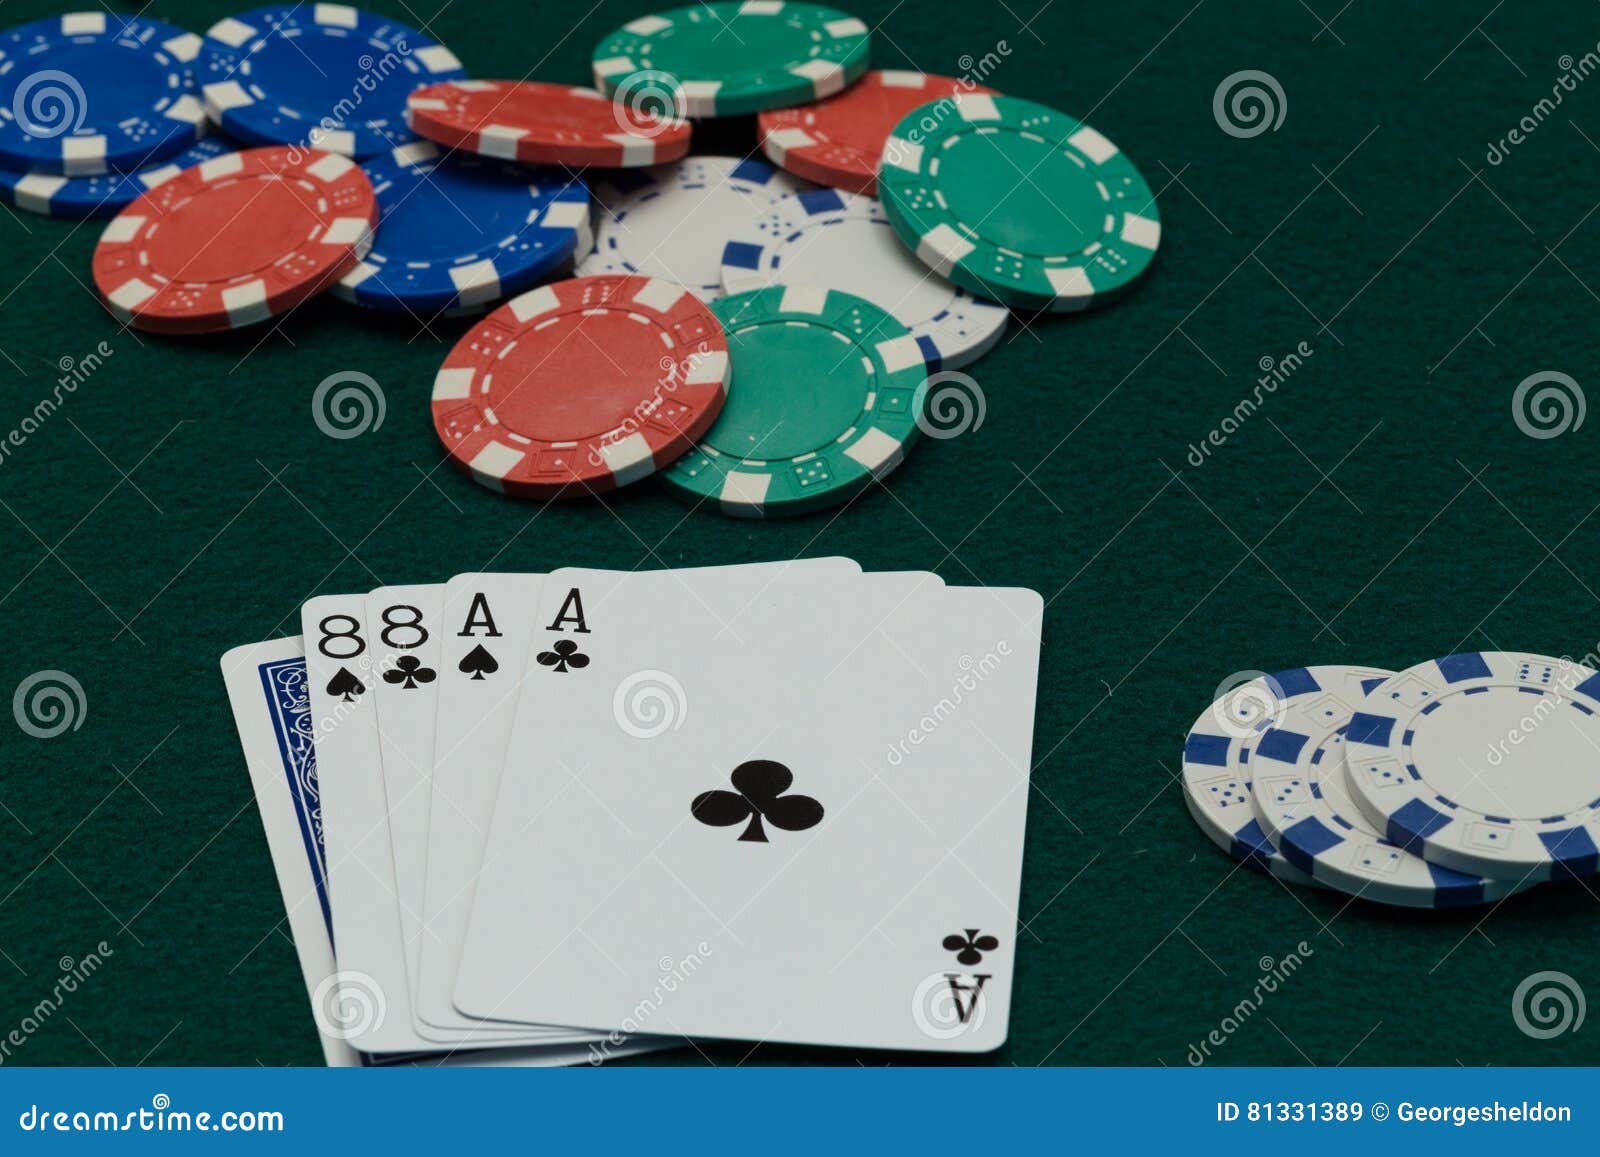 poker dead mans hand with chips